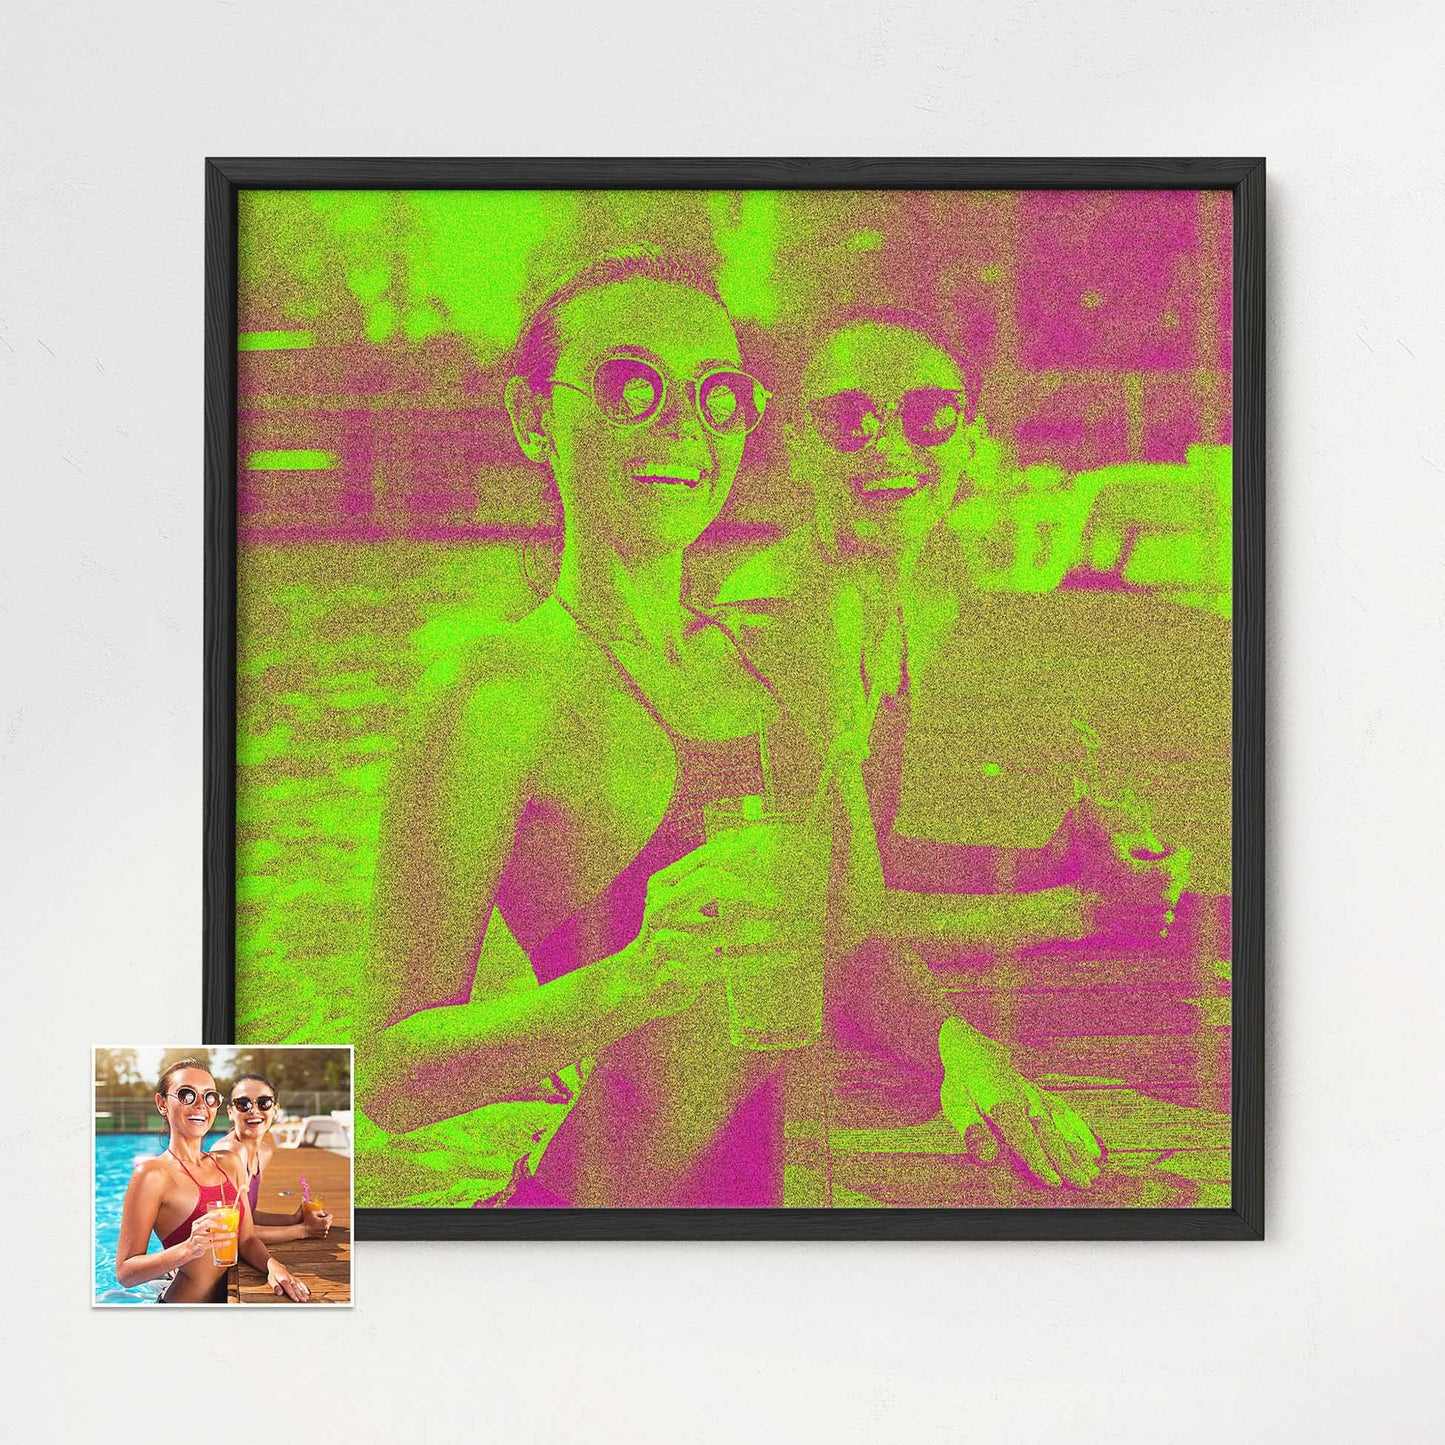 Turn up the fun with our Personalised Neon Green Framed Print. The vibrant and light-catching neon green tones bring a fresh and energetic vibe to your space. Crafted from your photo, this unique artwork is a true reflection of your style